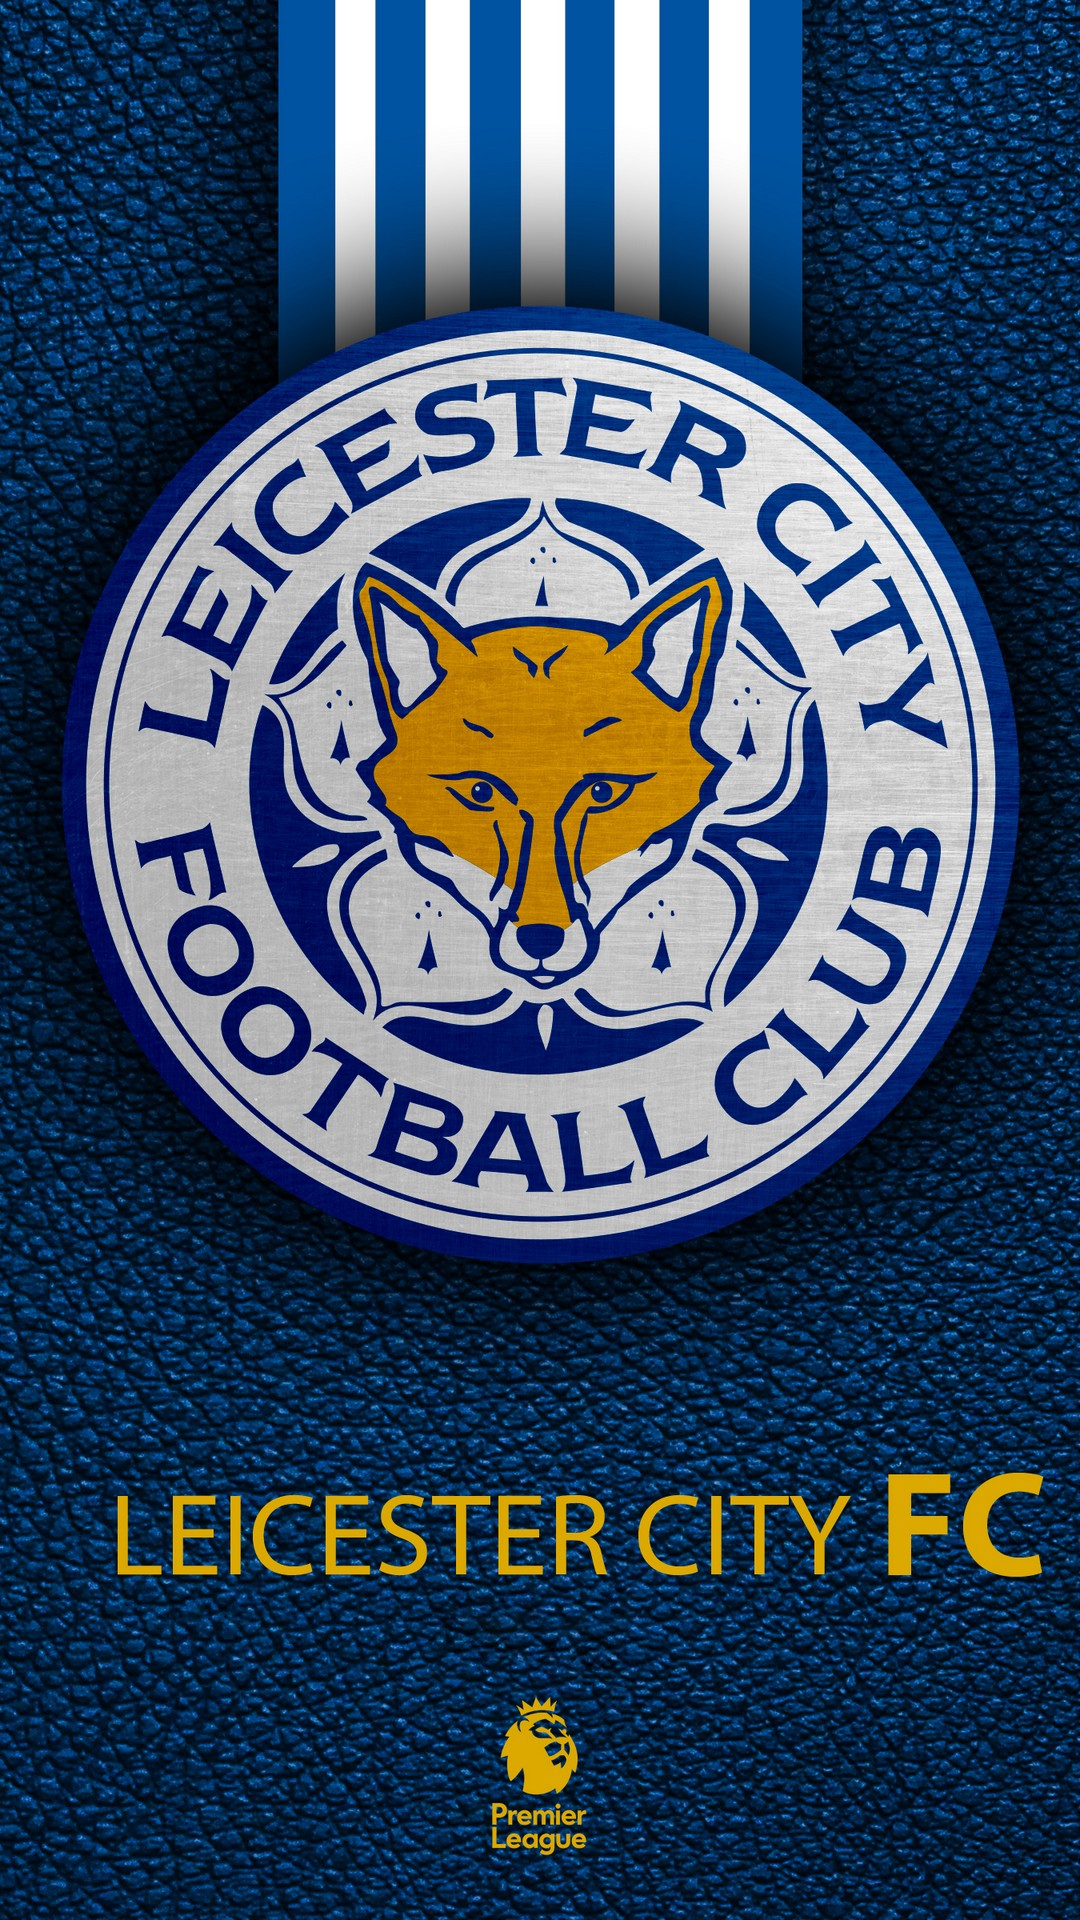 iPhone Wallpaper HD Leicester City Logo With high-resolution 1080X1920 pixel. You can use this wallpaper for your Desktop Computers, Mac Screensavers, Windows Backgrounds, iPhone Wallpapers, Tablet or Android Lock screen and another Mobile device